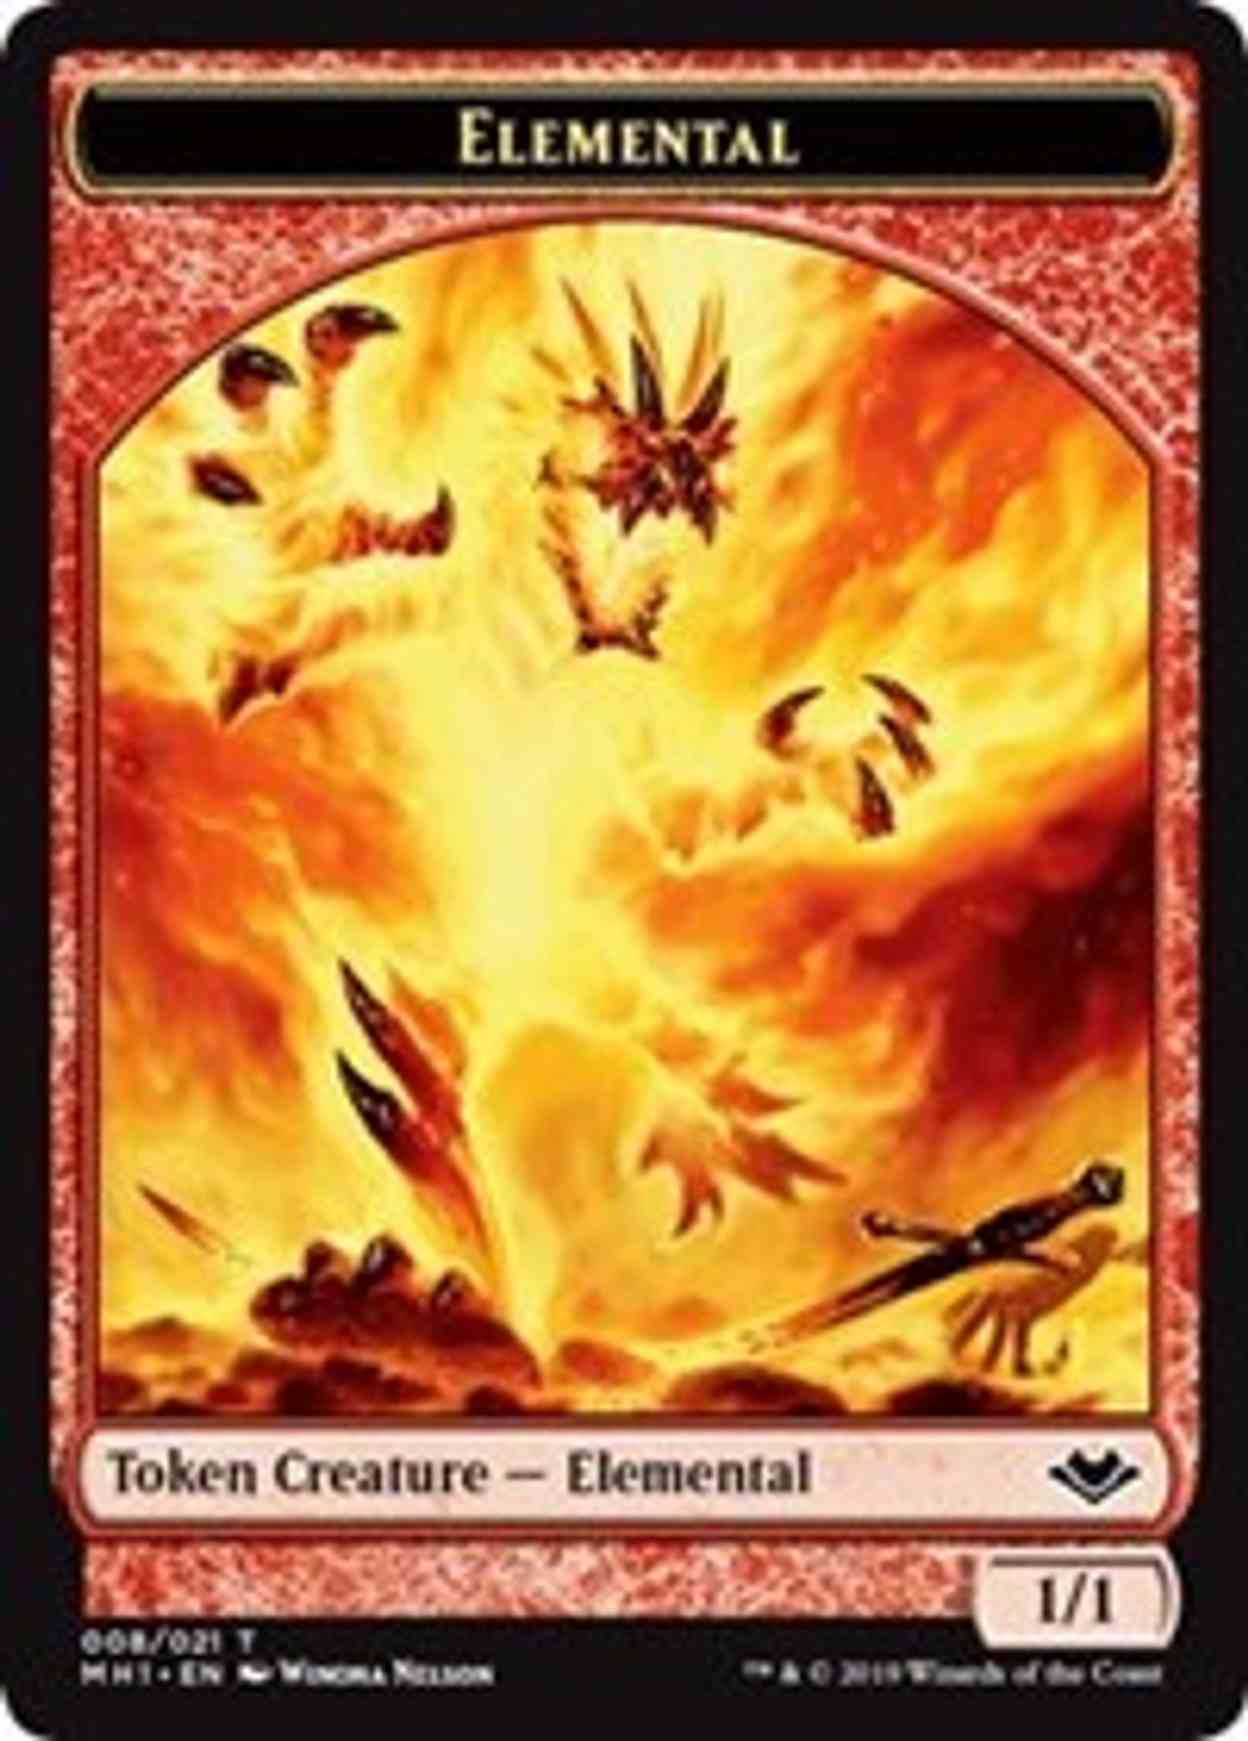 Elemental (008) // Rhino (013) Double-sided Token magic card front